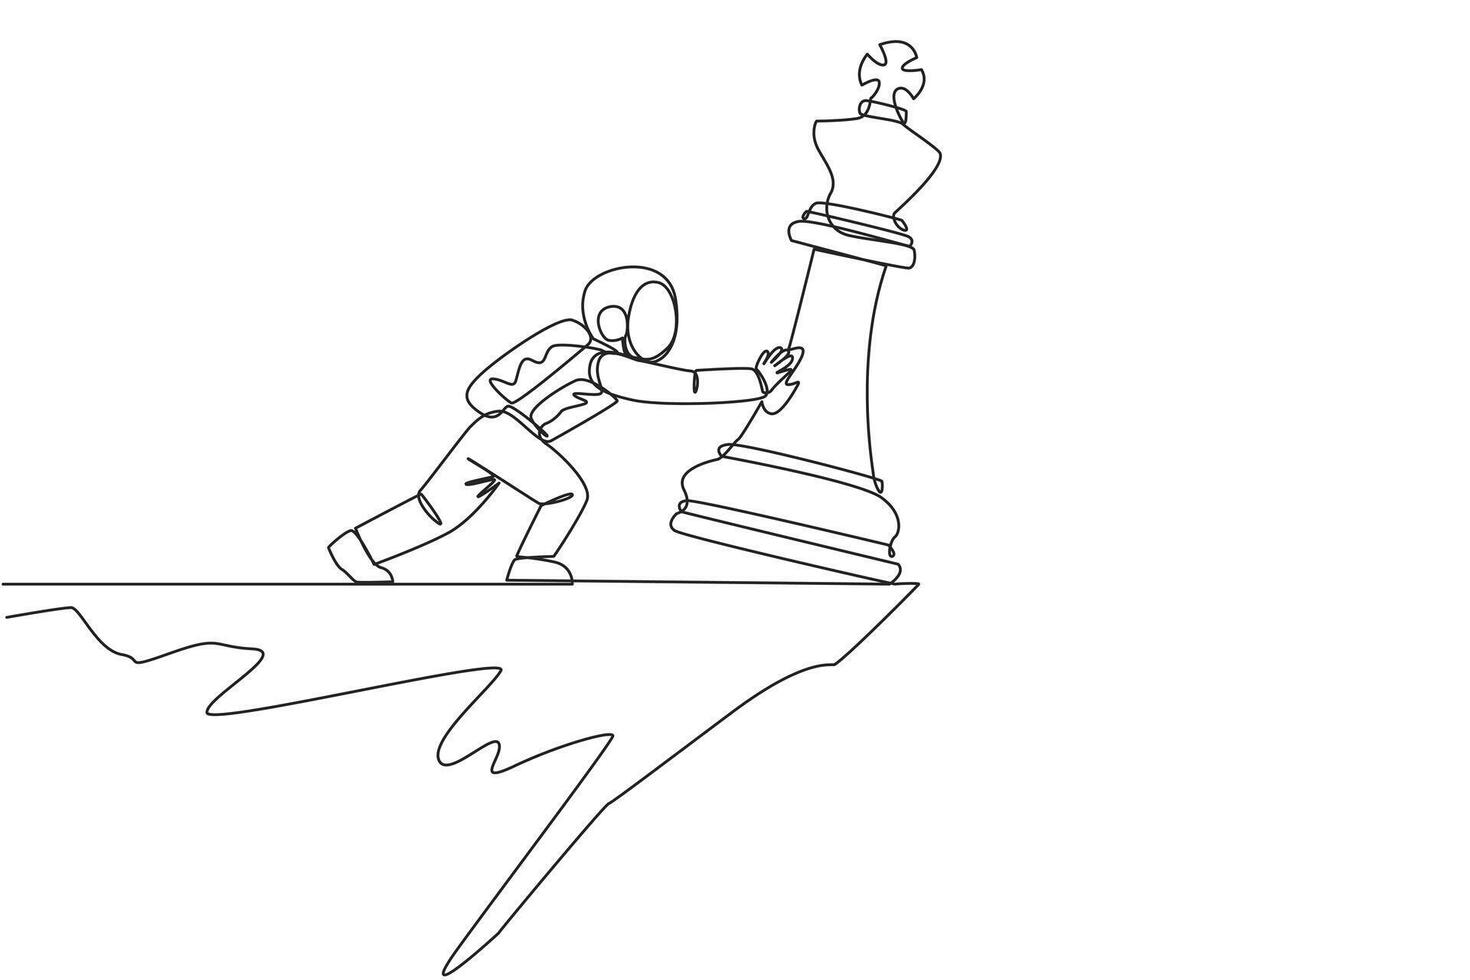 Single one line drawing astronaut pushes giant chess piece of king over the edge of a cliff. Lost leader during an expedition on the lunar surface. Cosmic. Continuous line design graphic illustration vector